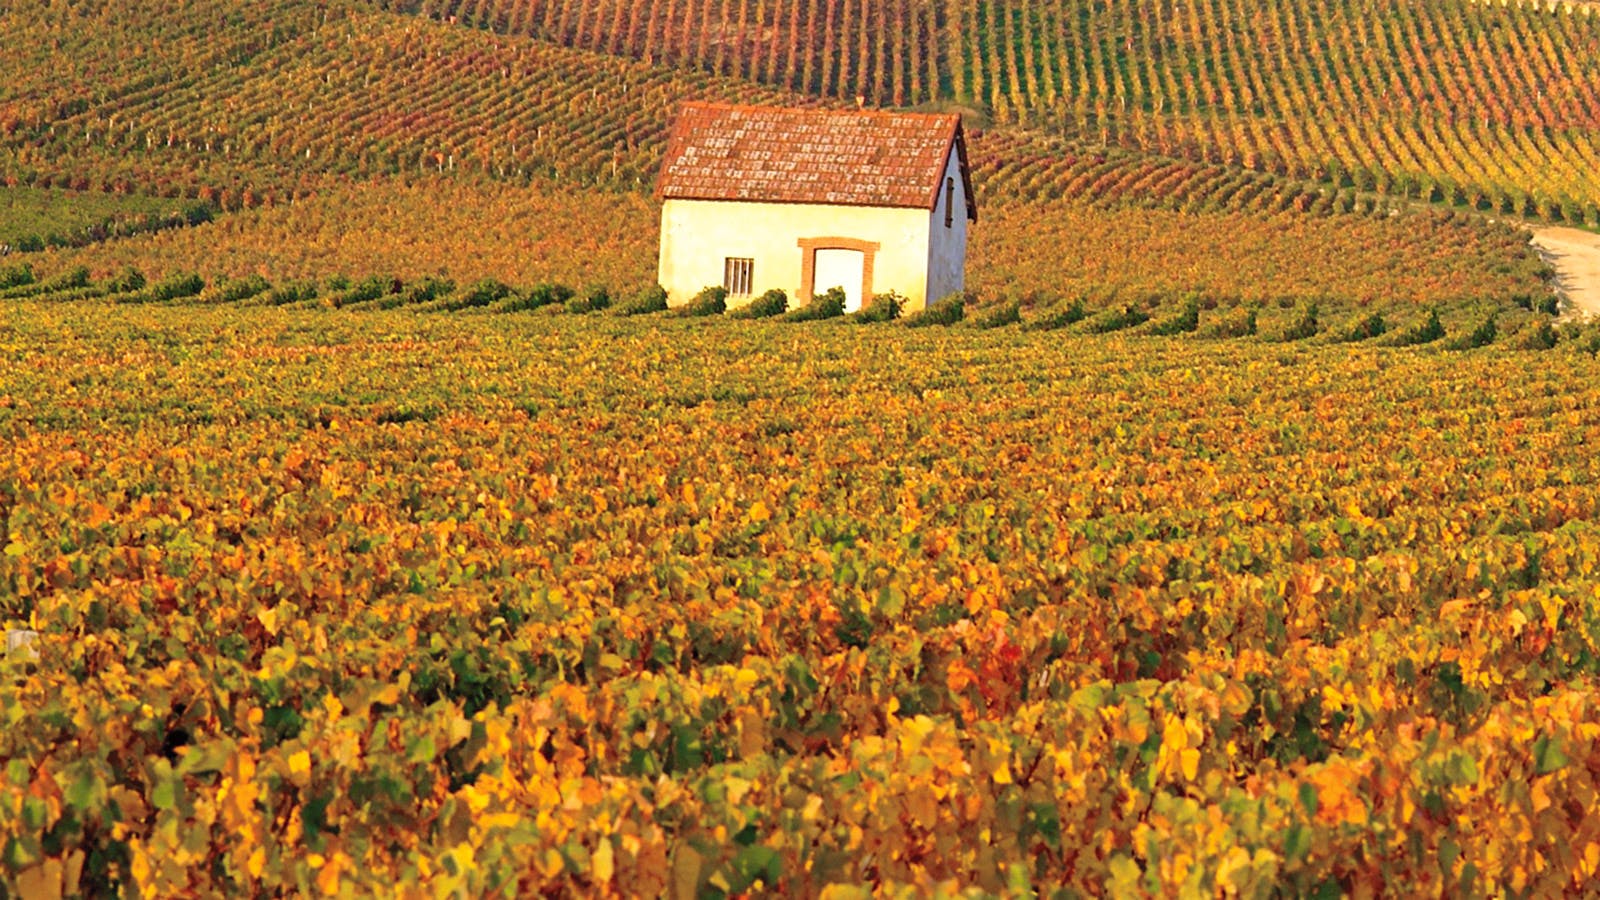 Burgundy and Champagne Vineyards Are Officially Cultural Treasures